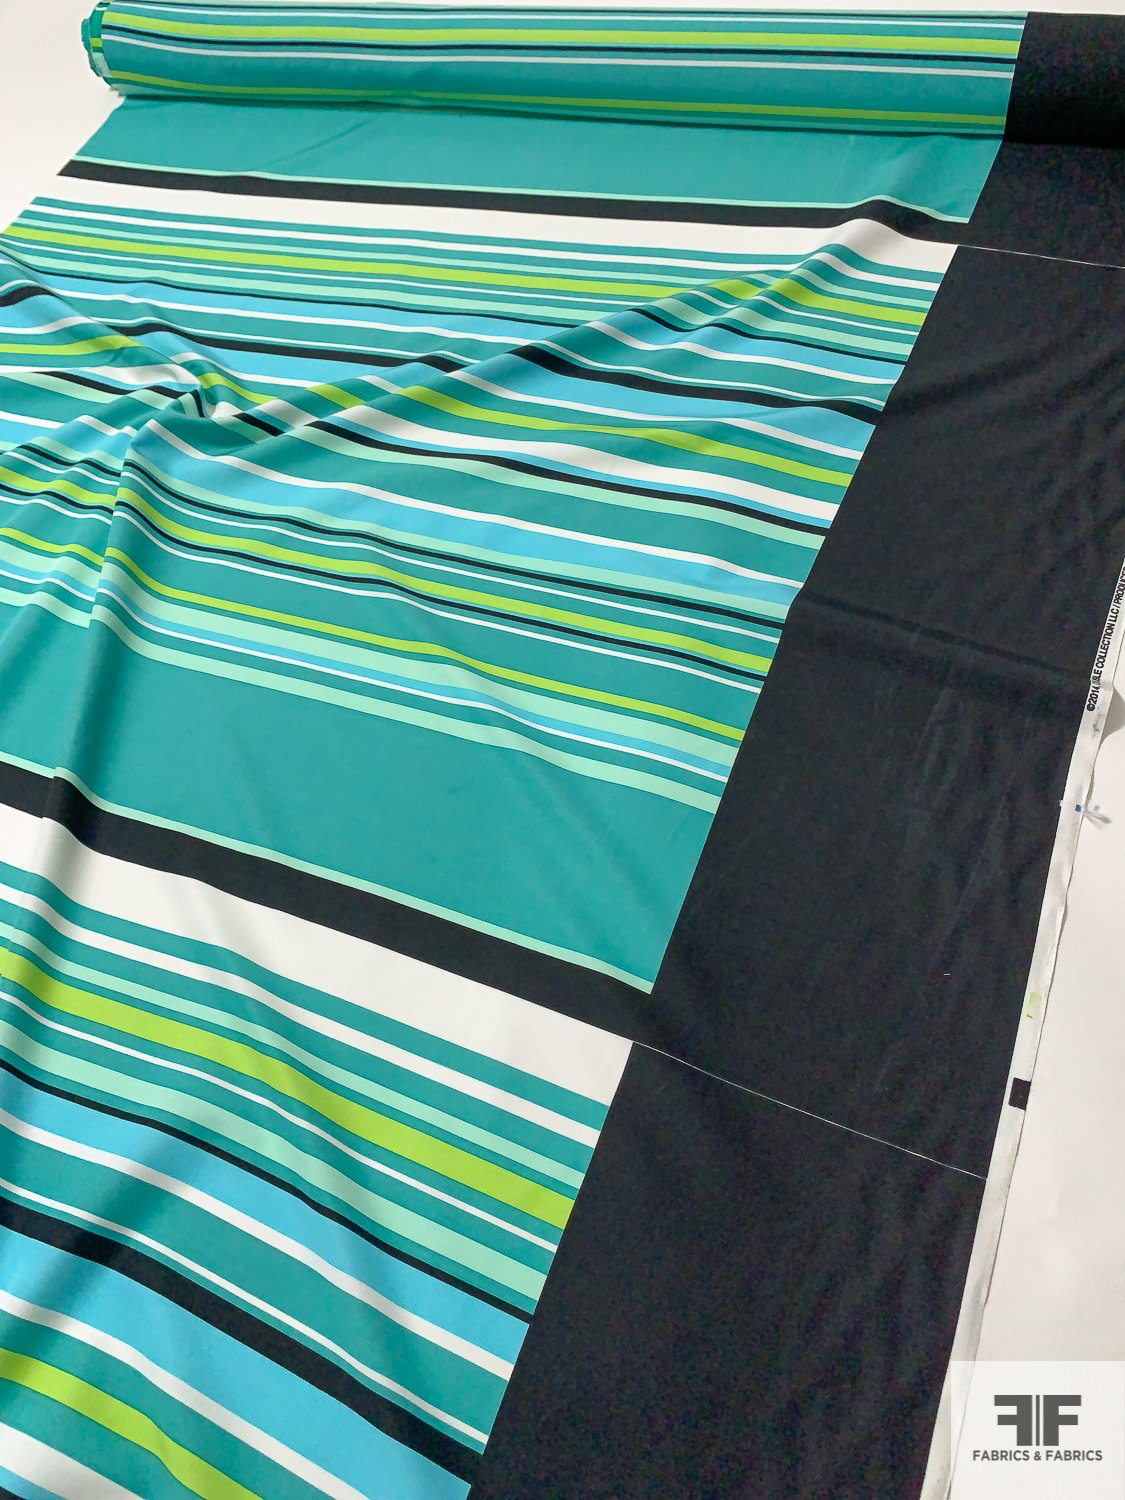 Multisize Stripe Printed Lightweight Cotton and Silk Faille Panel - Teal / Seafoam / Turquoise / Lime